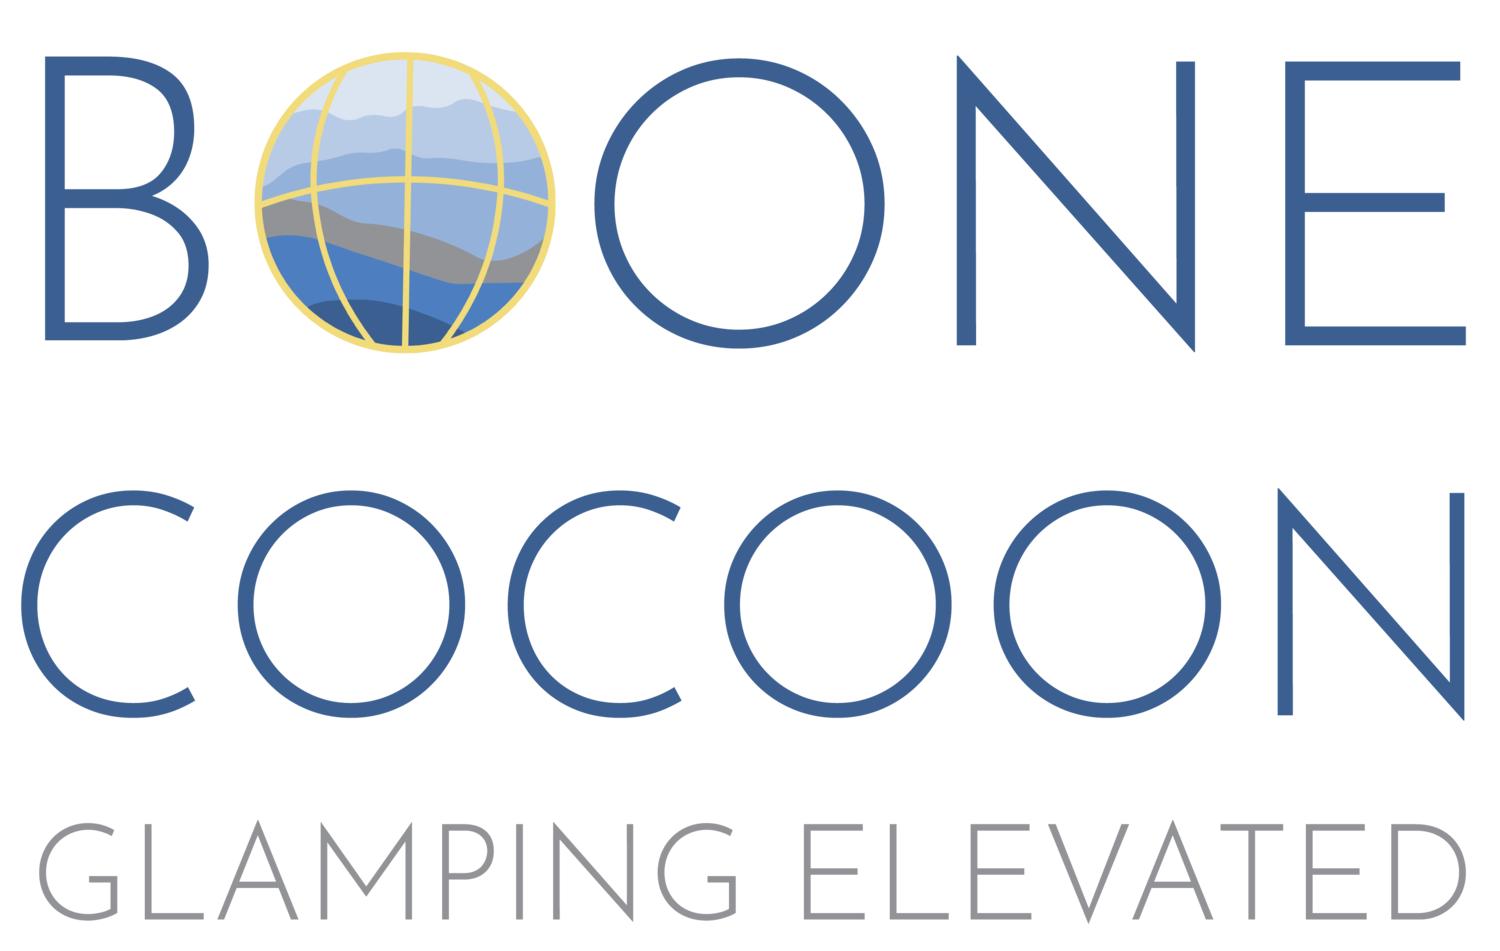 Boone Cocoon Glamping in Boone NC | Rock camping | Luxury campground North Carolina